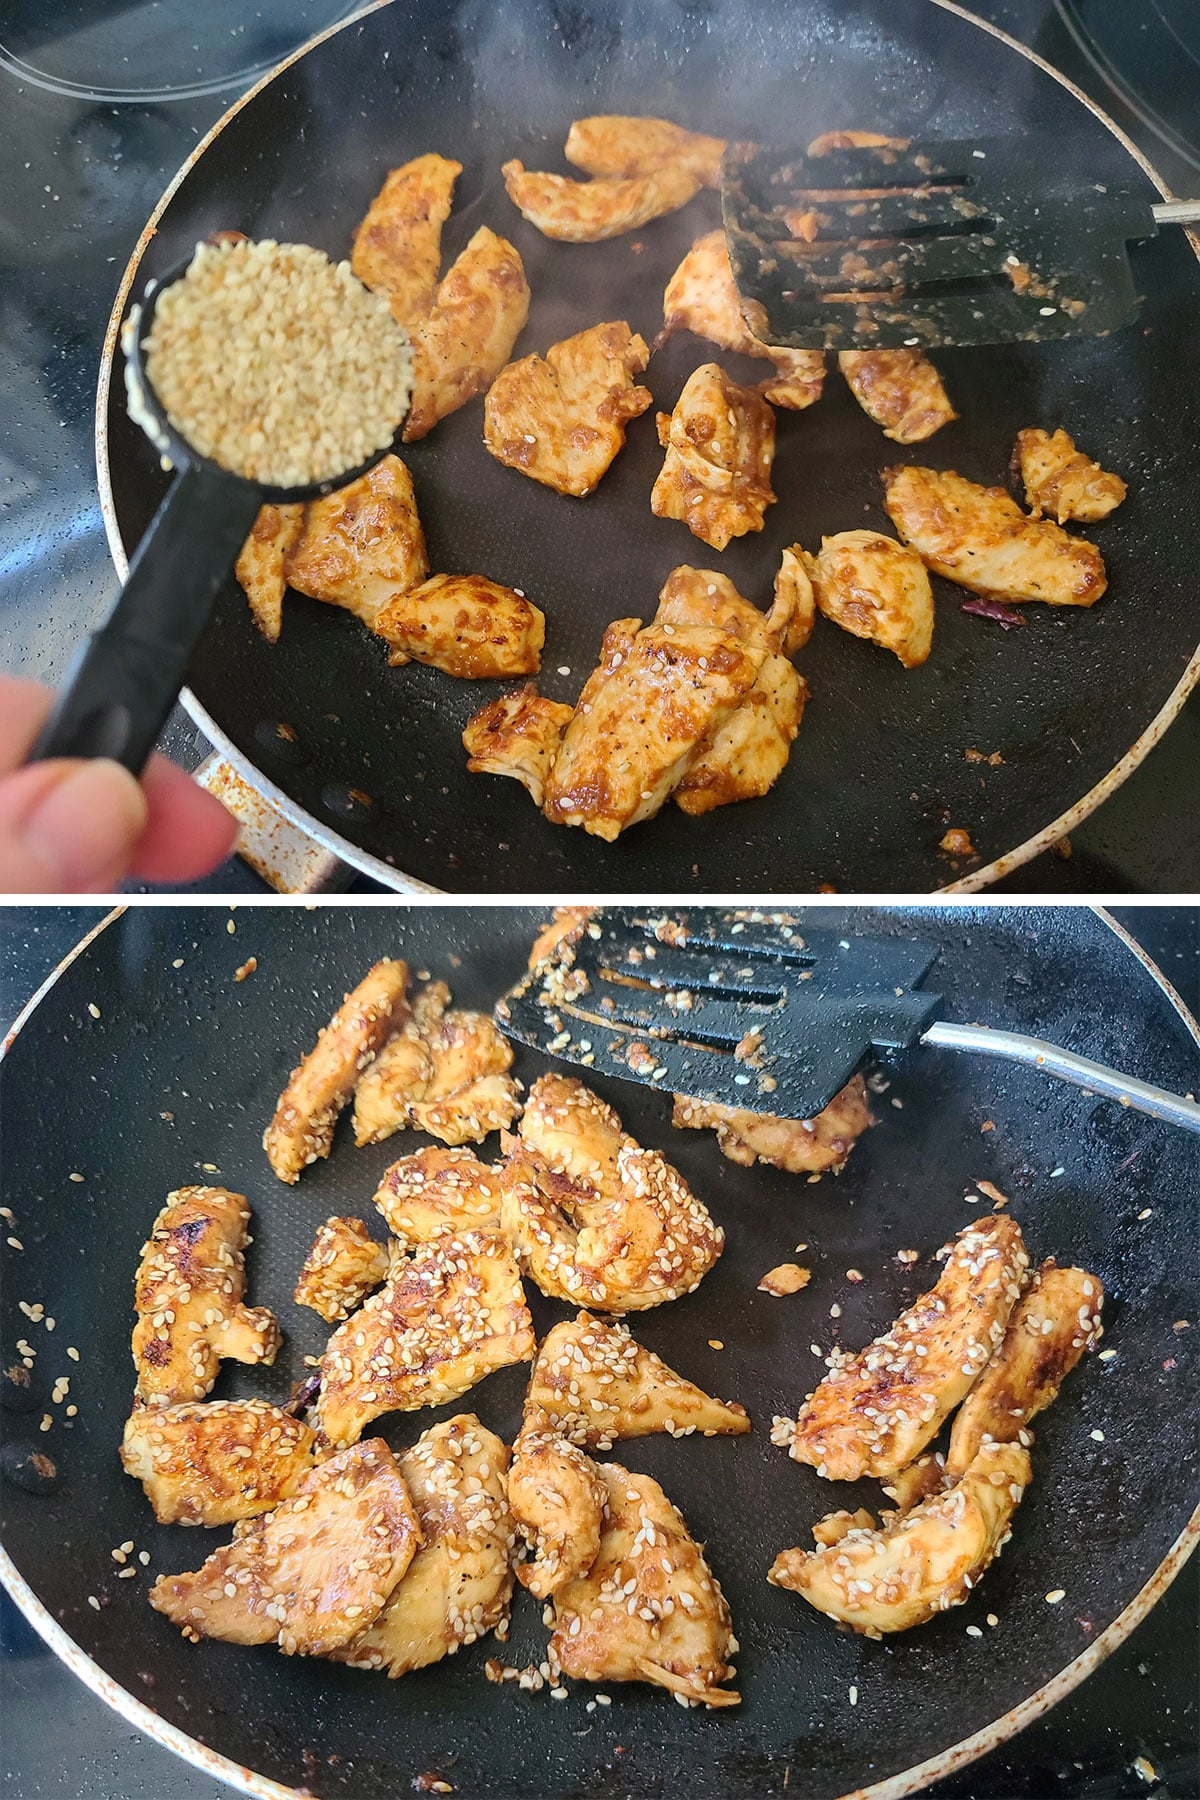 A 2 part image showing sesame seeds being added to the pan of glazed chicken.